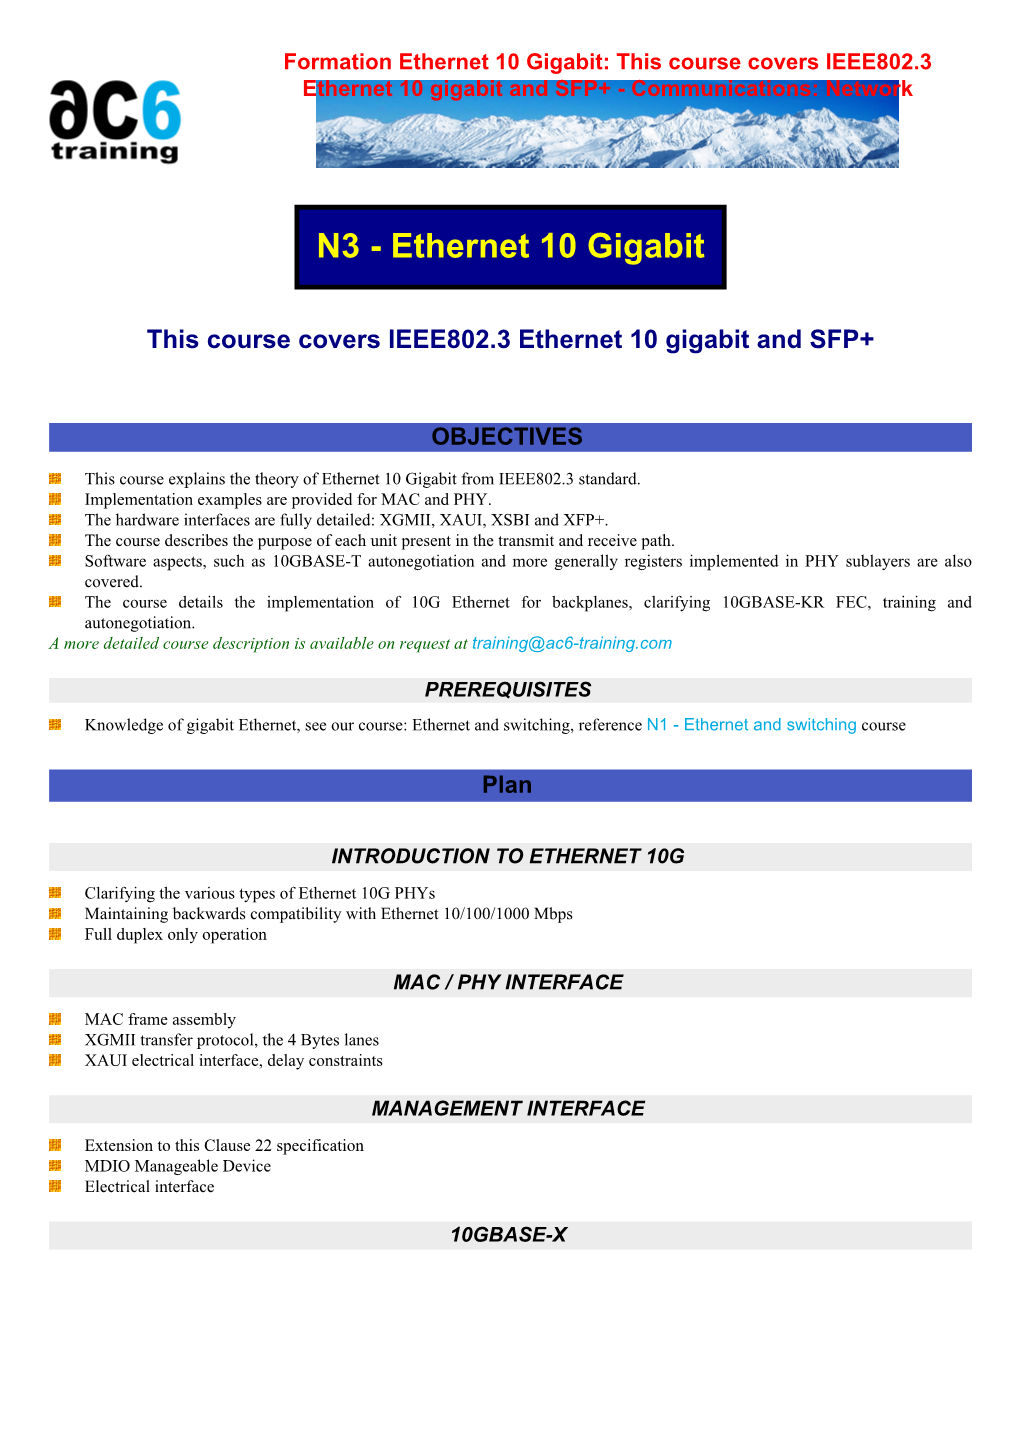 This Course Covers IEEE802.3 Ethernet 10 Gigabit and SFP+ - Communications: Network